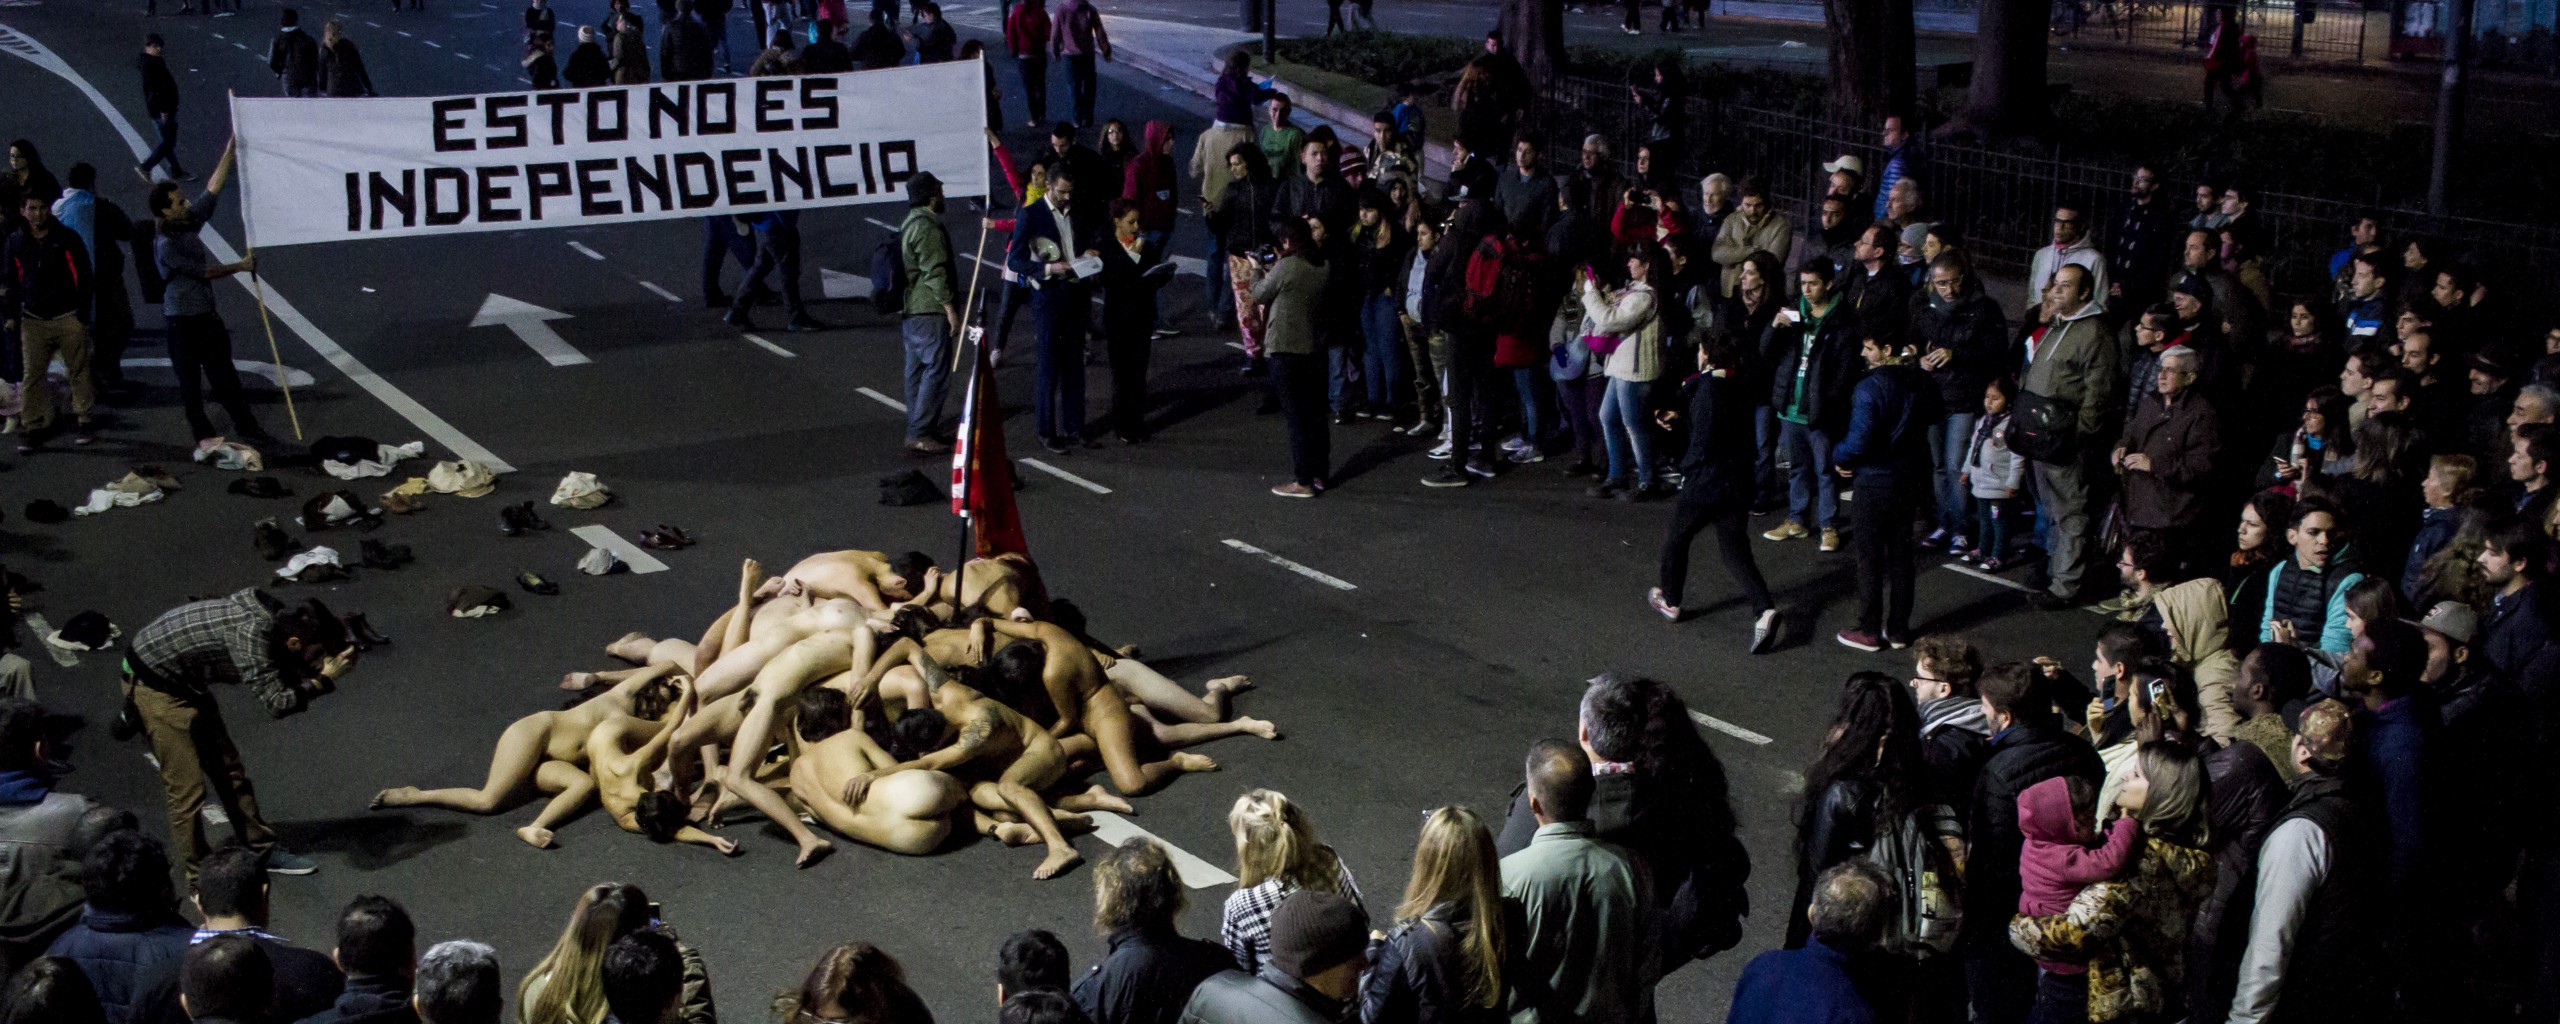 A pile of naked protesters lie in a pile under a banner that reads ESTO NO ES INDEPENDENCIA.